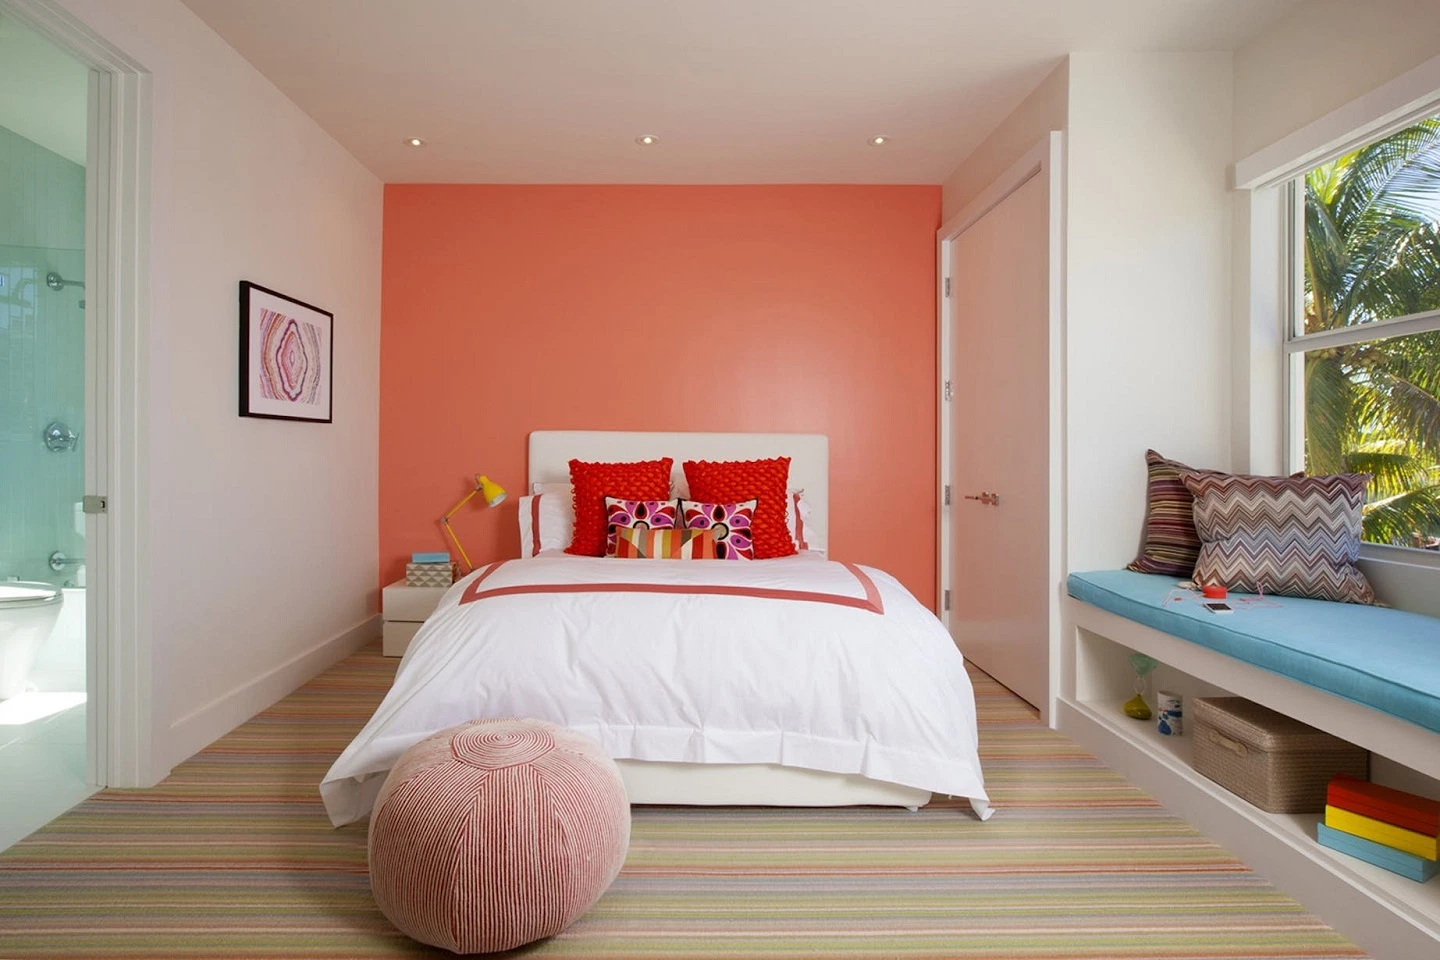 Paint Tricks to Make Narrow Rooms Look Wider.